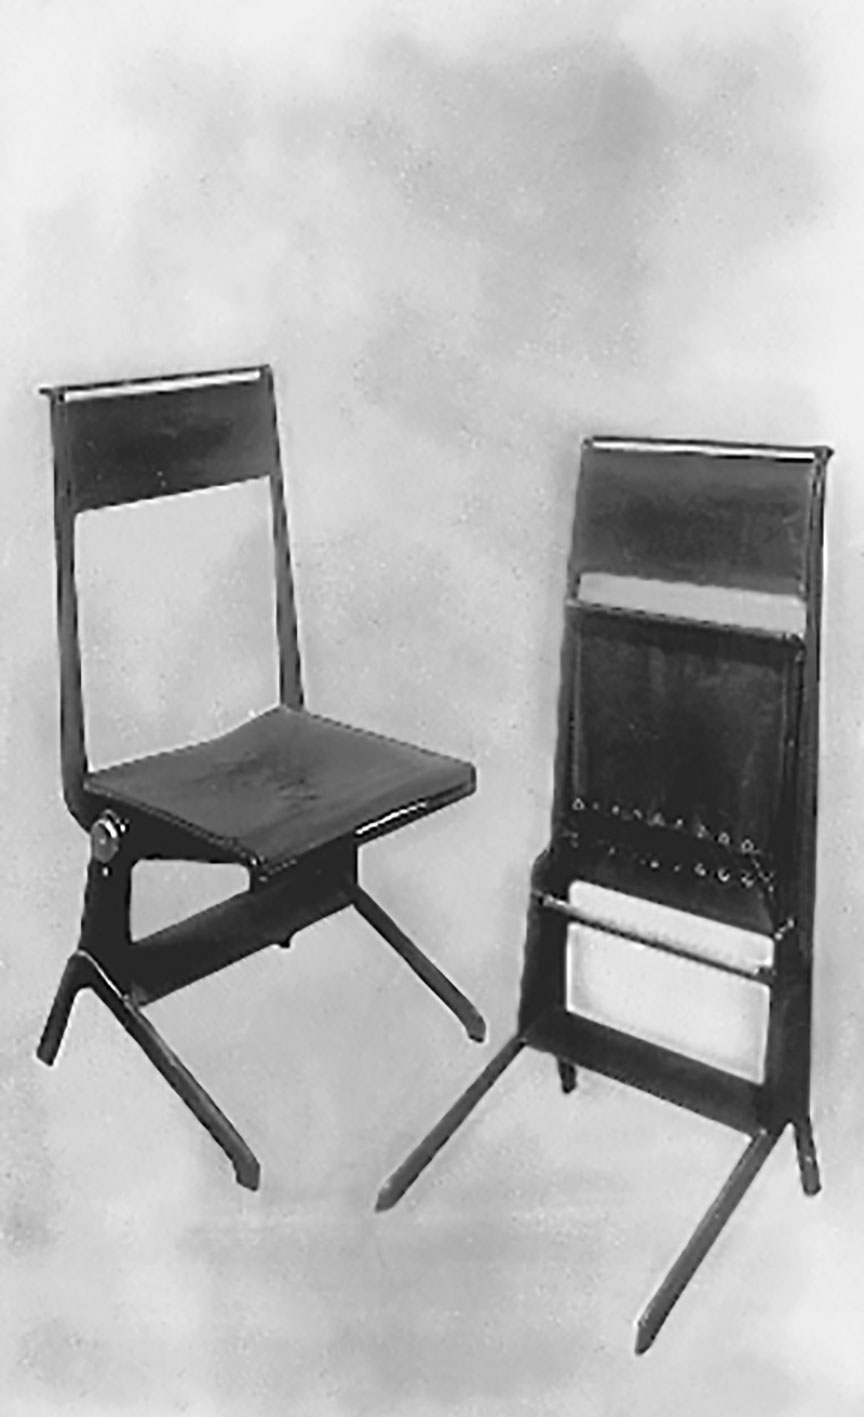 Reclining chair and folding chair. Plate from the catalog <i>Jean Prouvé ferronnier</i>, c. 1930.